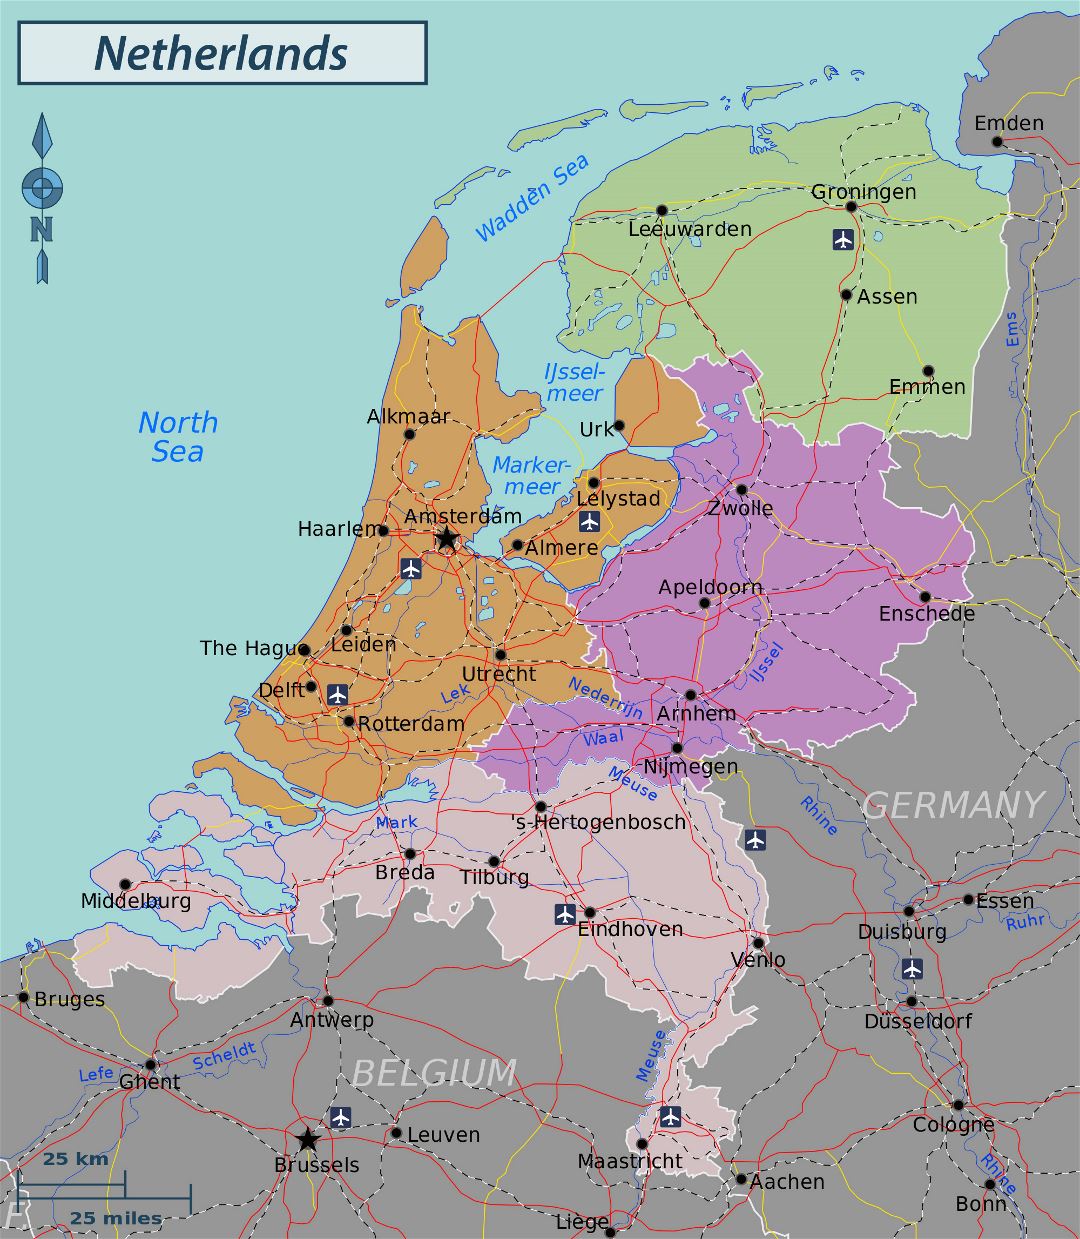 Large regions map of Netherlands